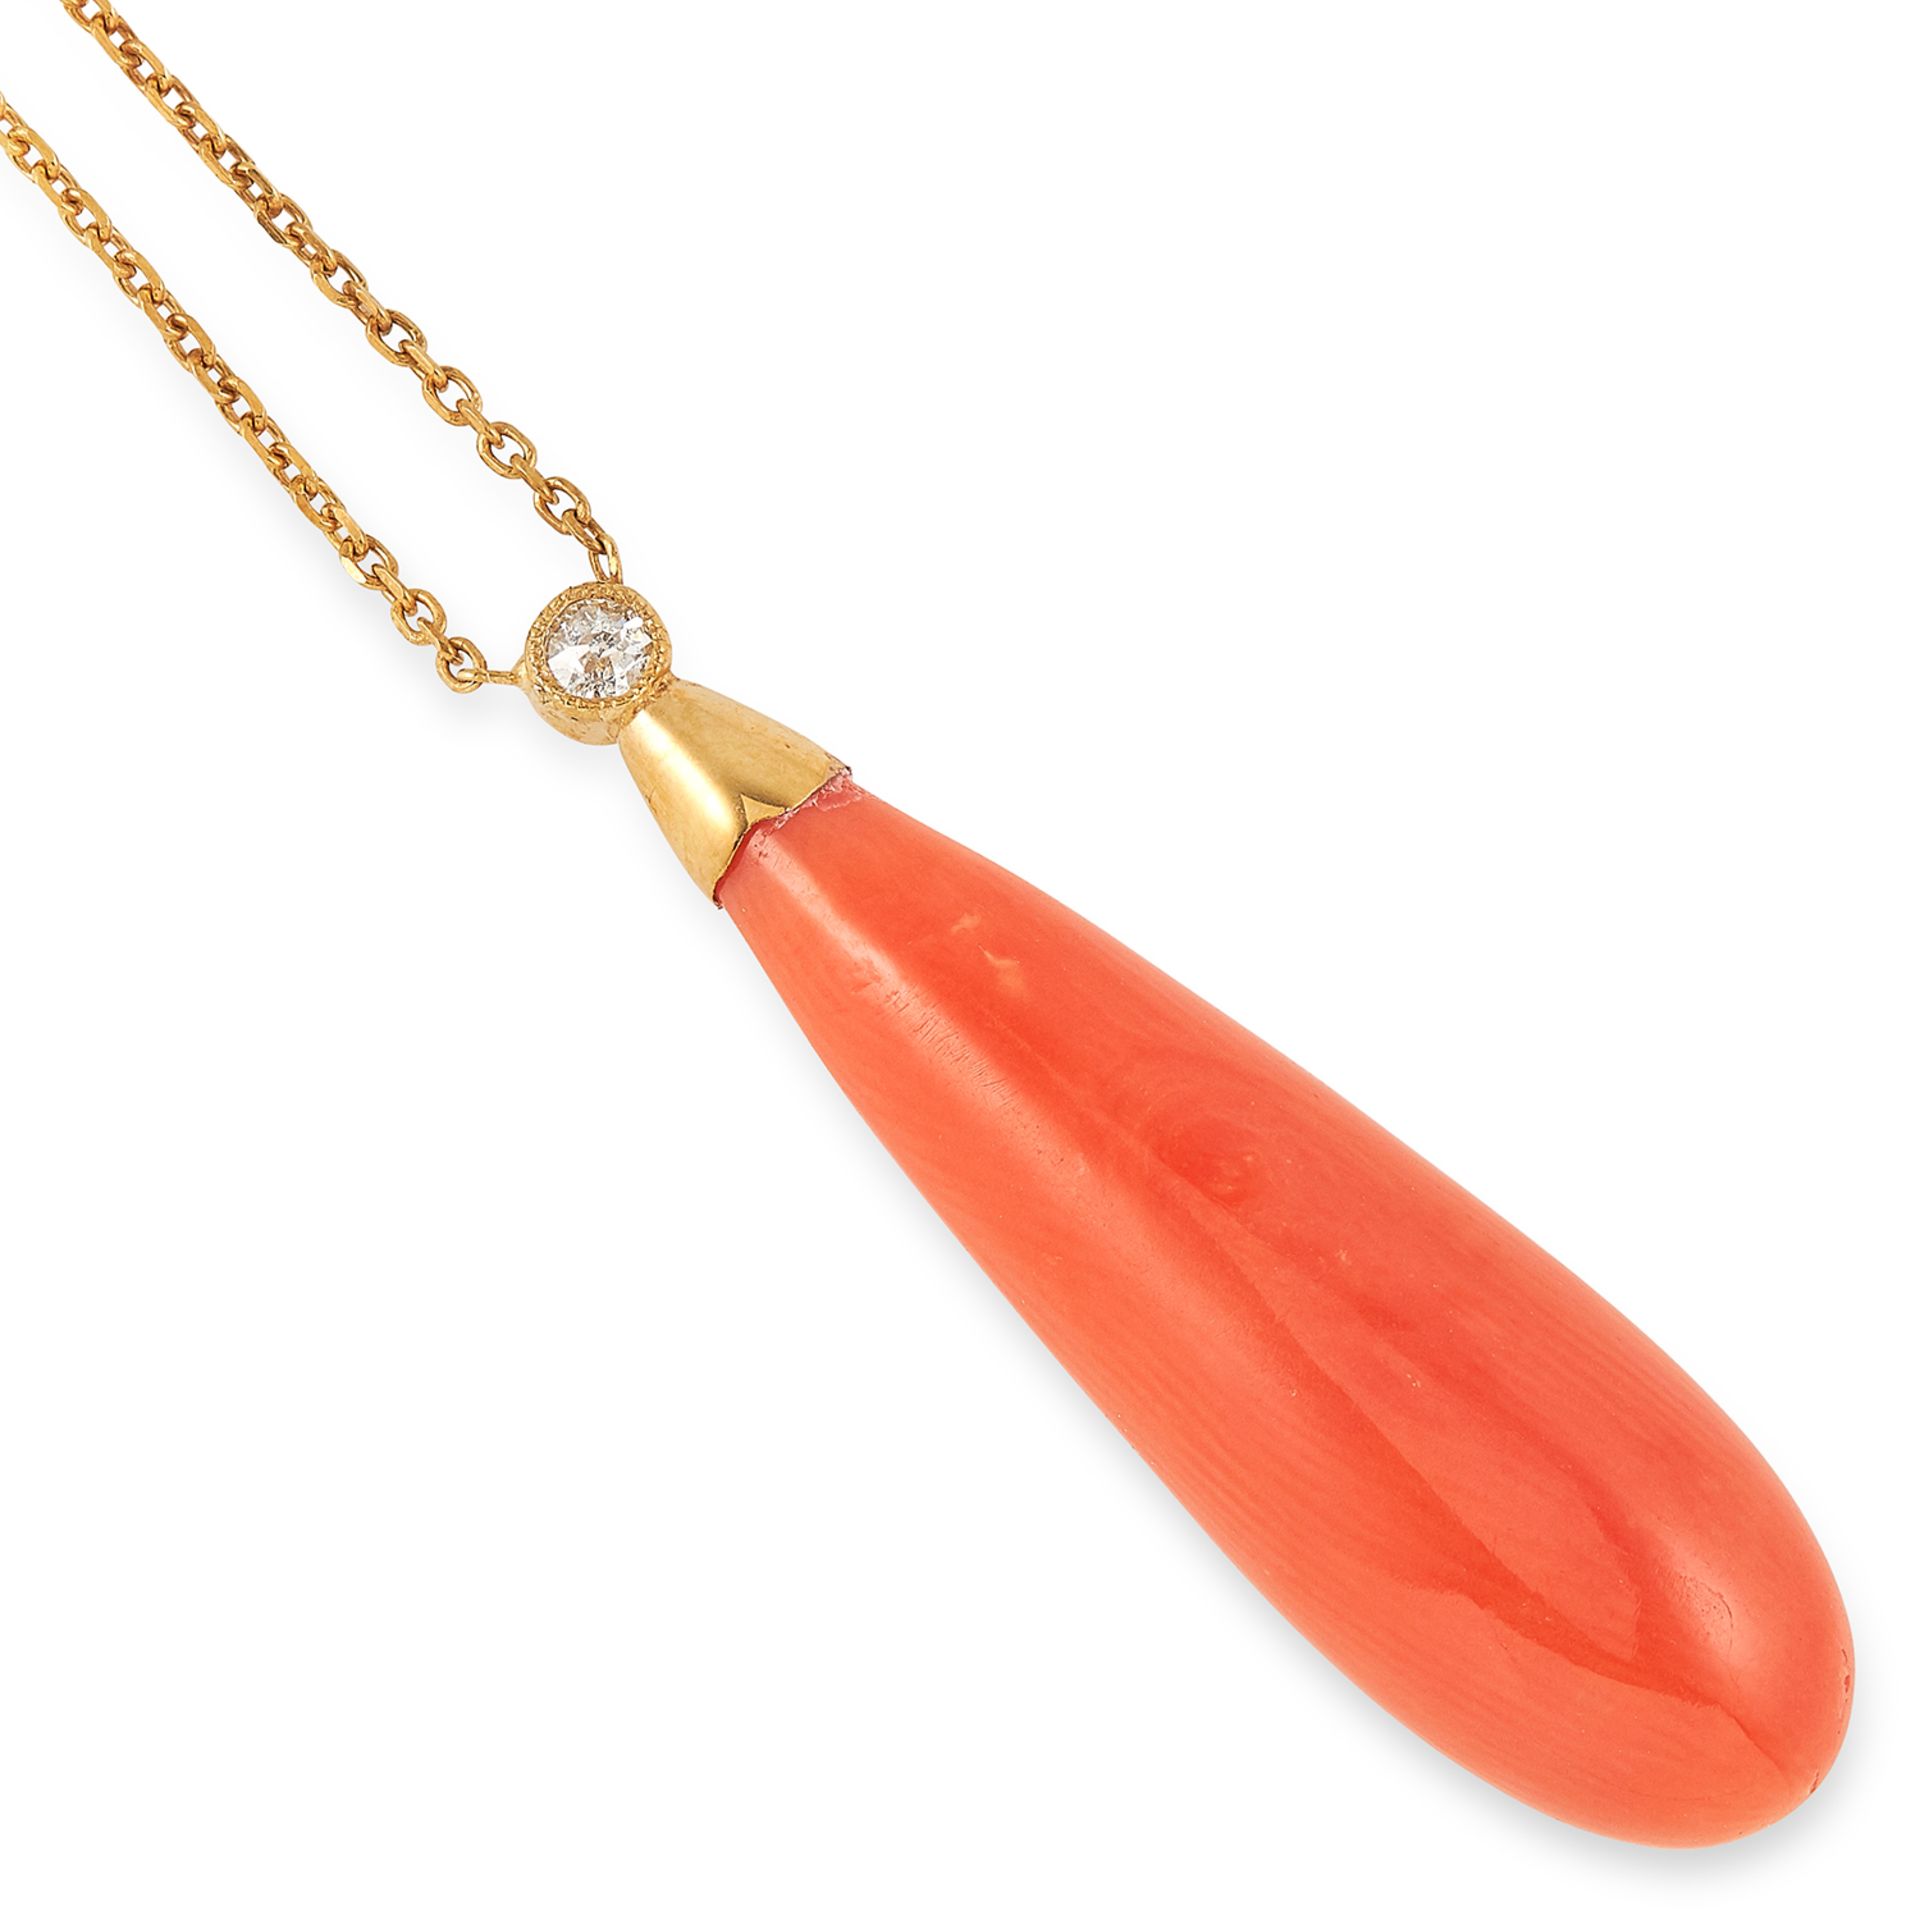 CORAL AND DIAMOND DROP PENDANT set with a round cut diamond suspending a polished coral briolette,